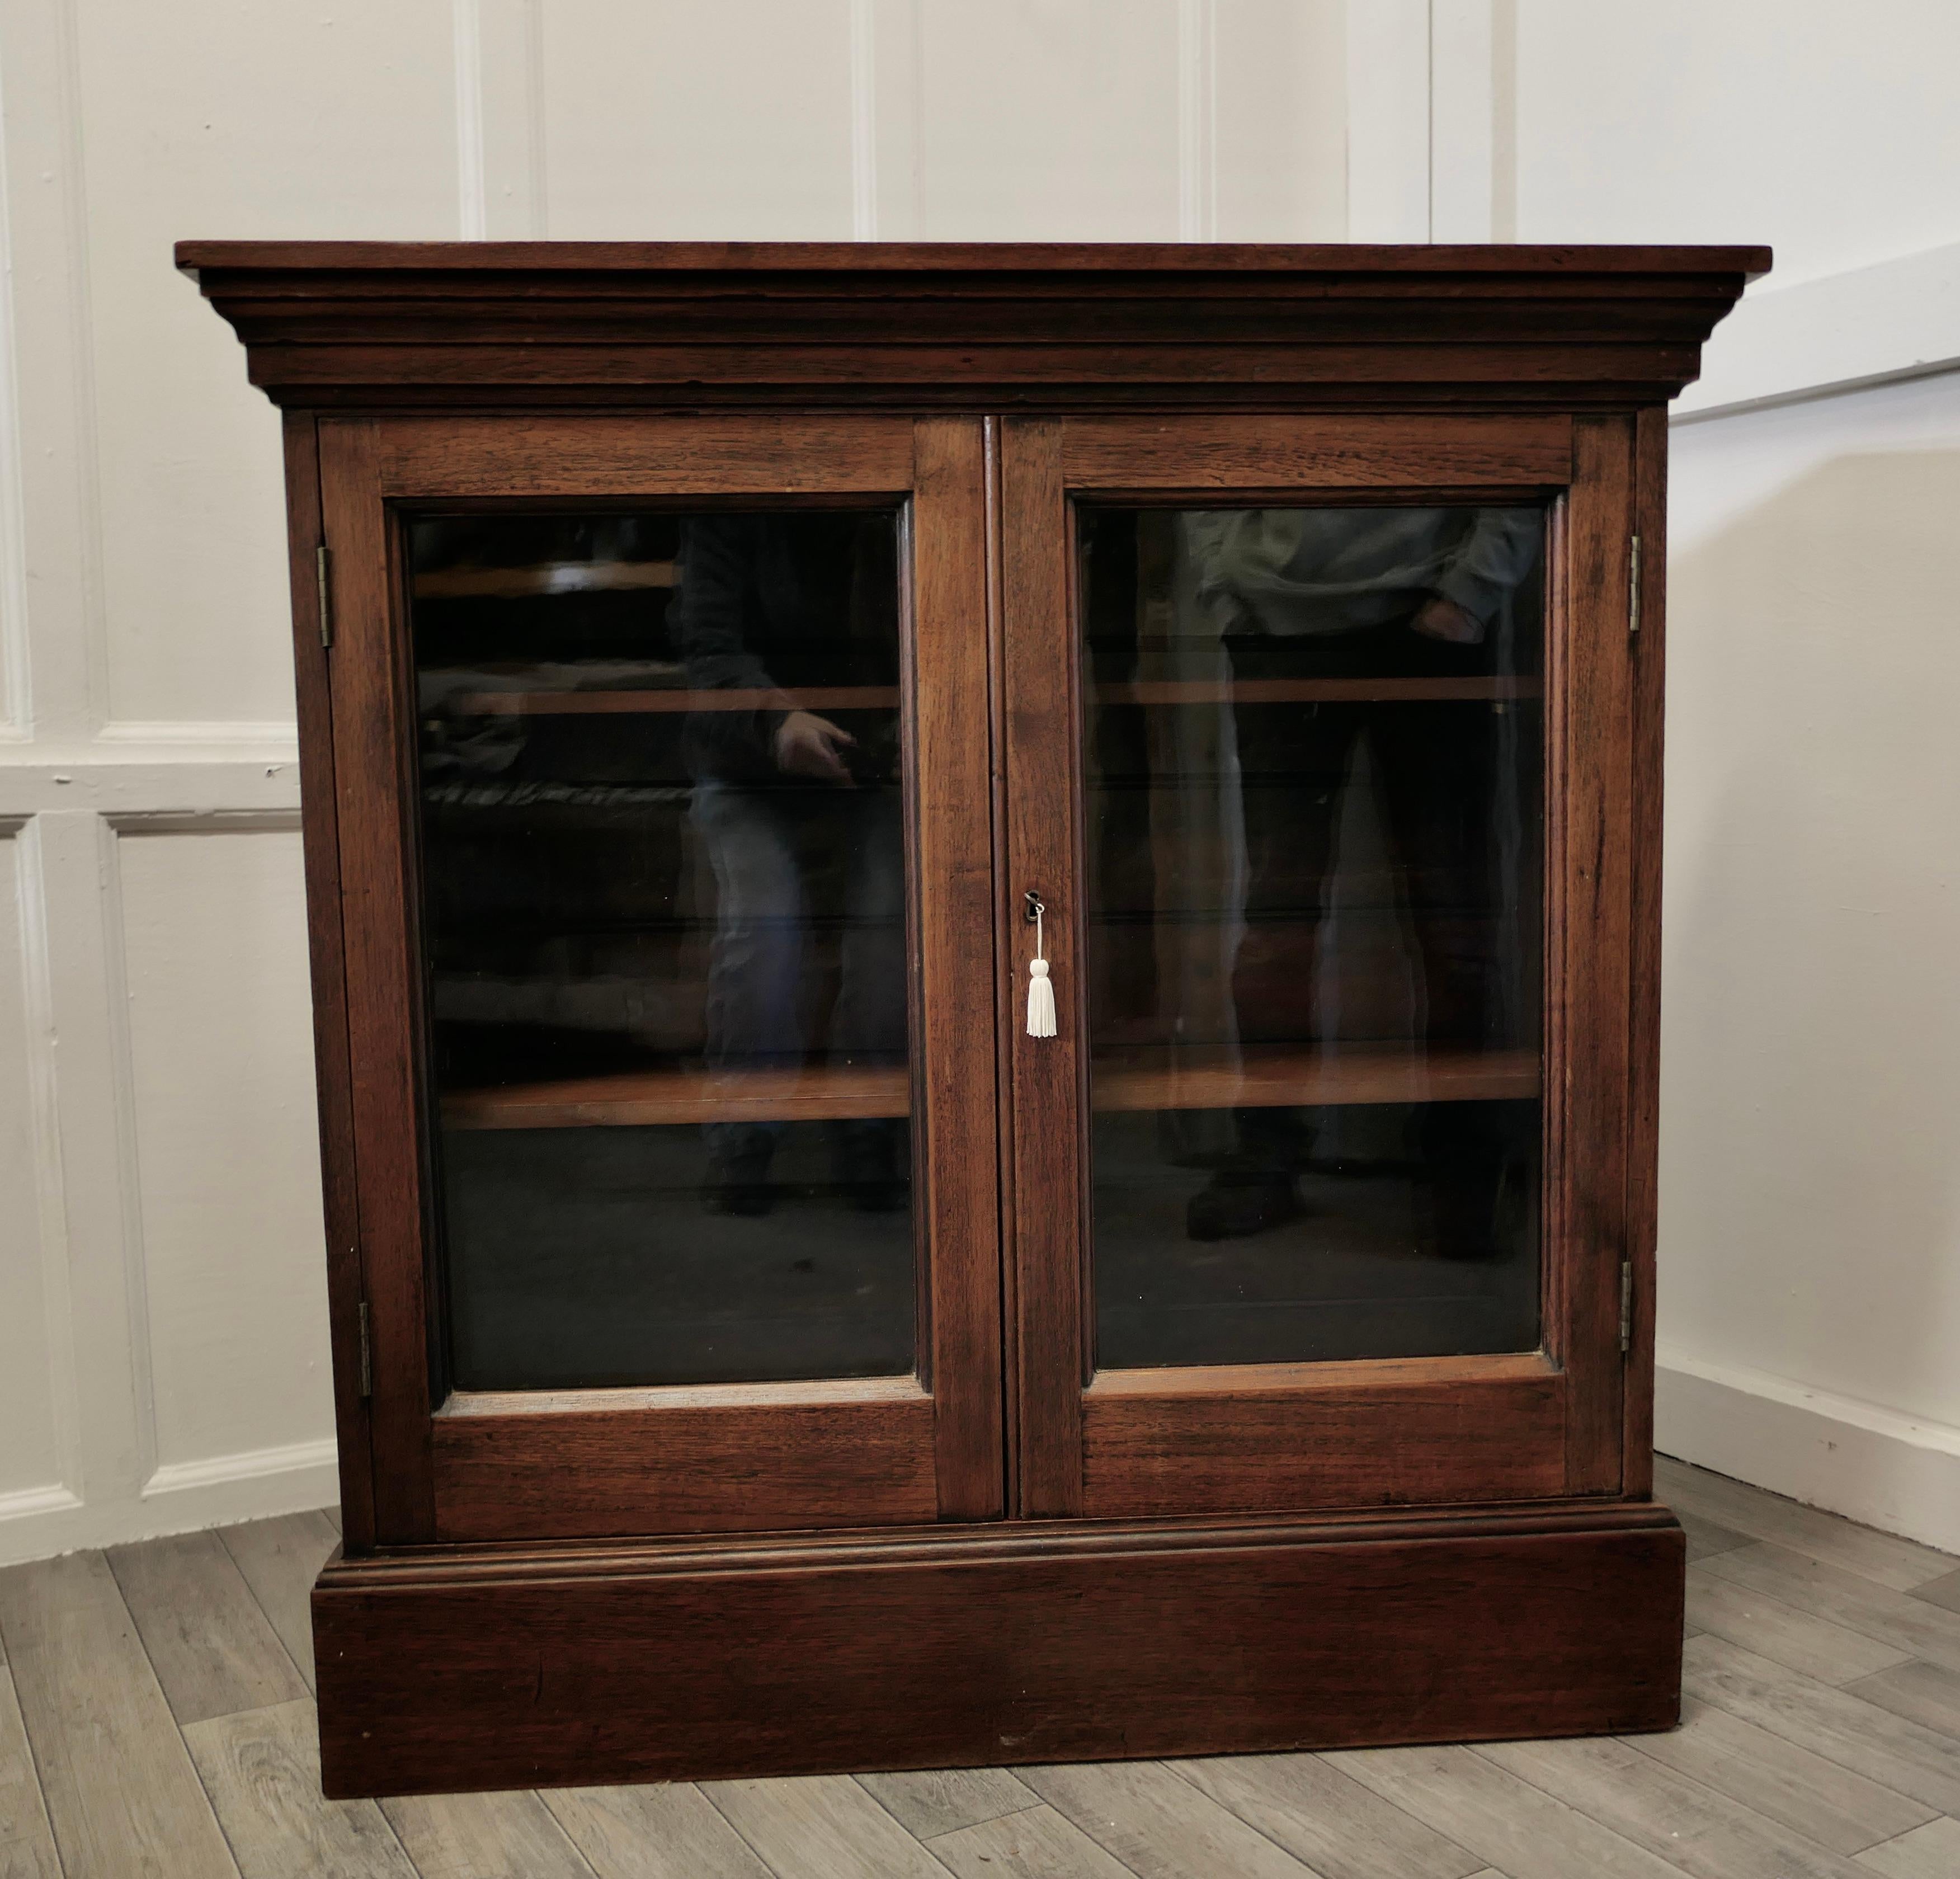 Fine Quality 19th Century Walnut Glazed bookcase.

A Charming Walnut 2 door glazed cupboard or bookcase, this is a fine quality piece, it stands on a deep plinth and it has a moulded cornice
The cabinet has 2 adjustable shelves to the interior,